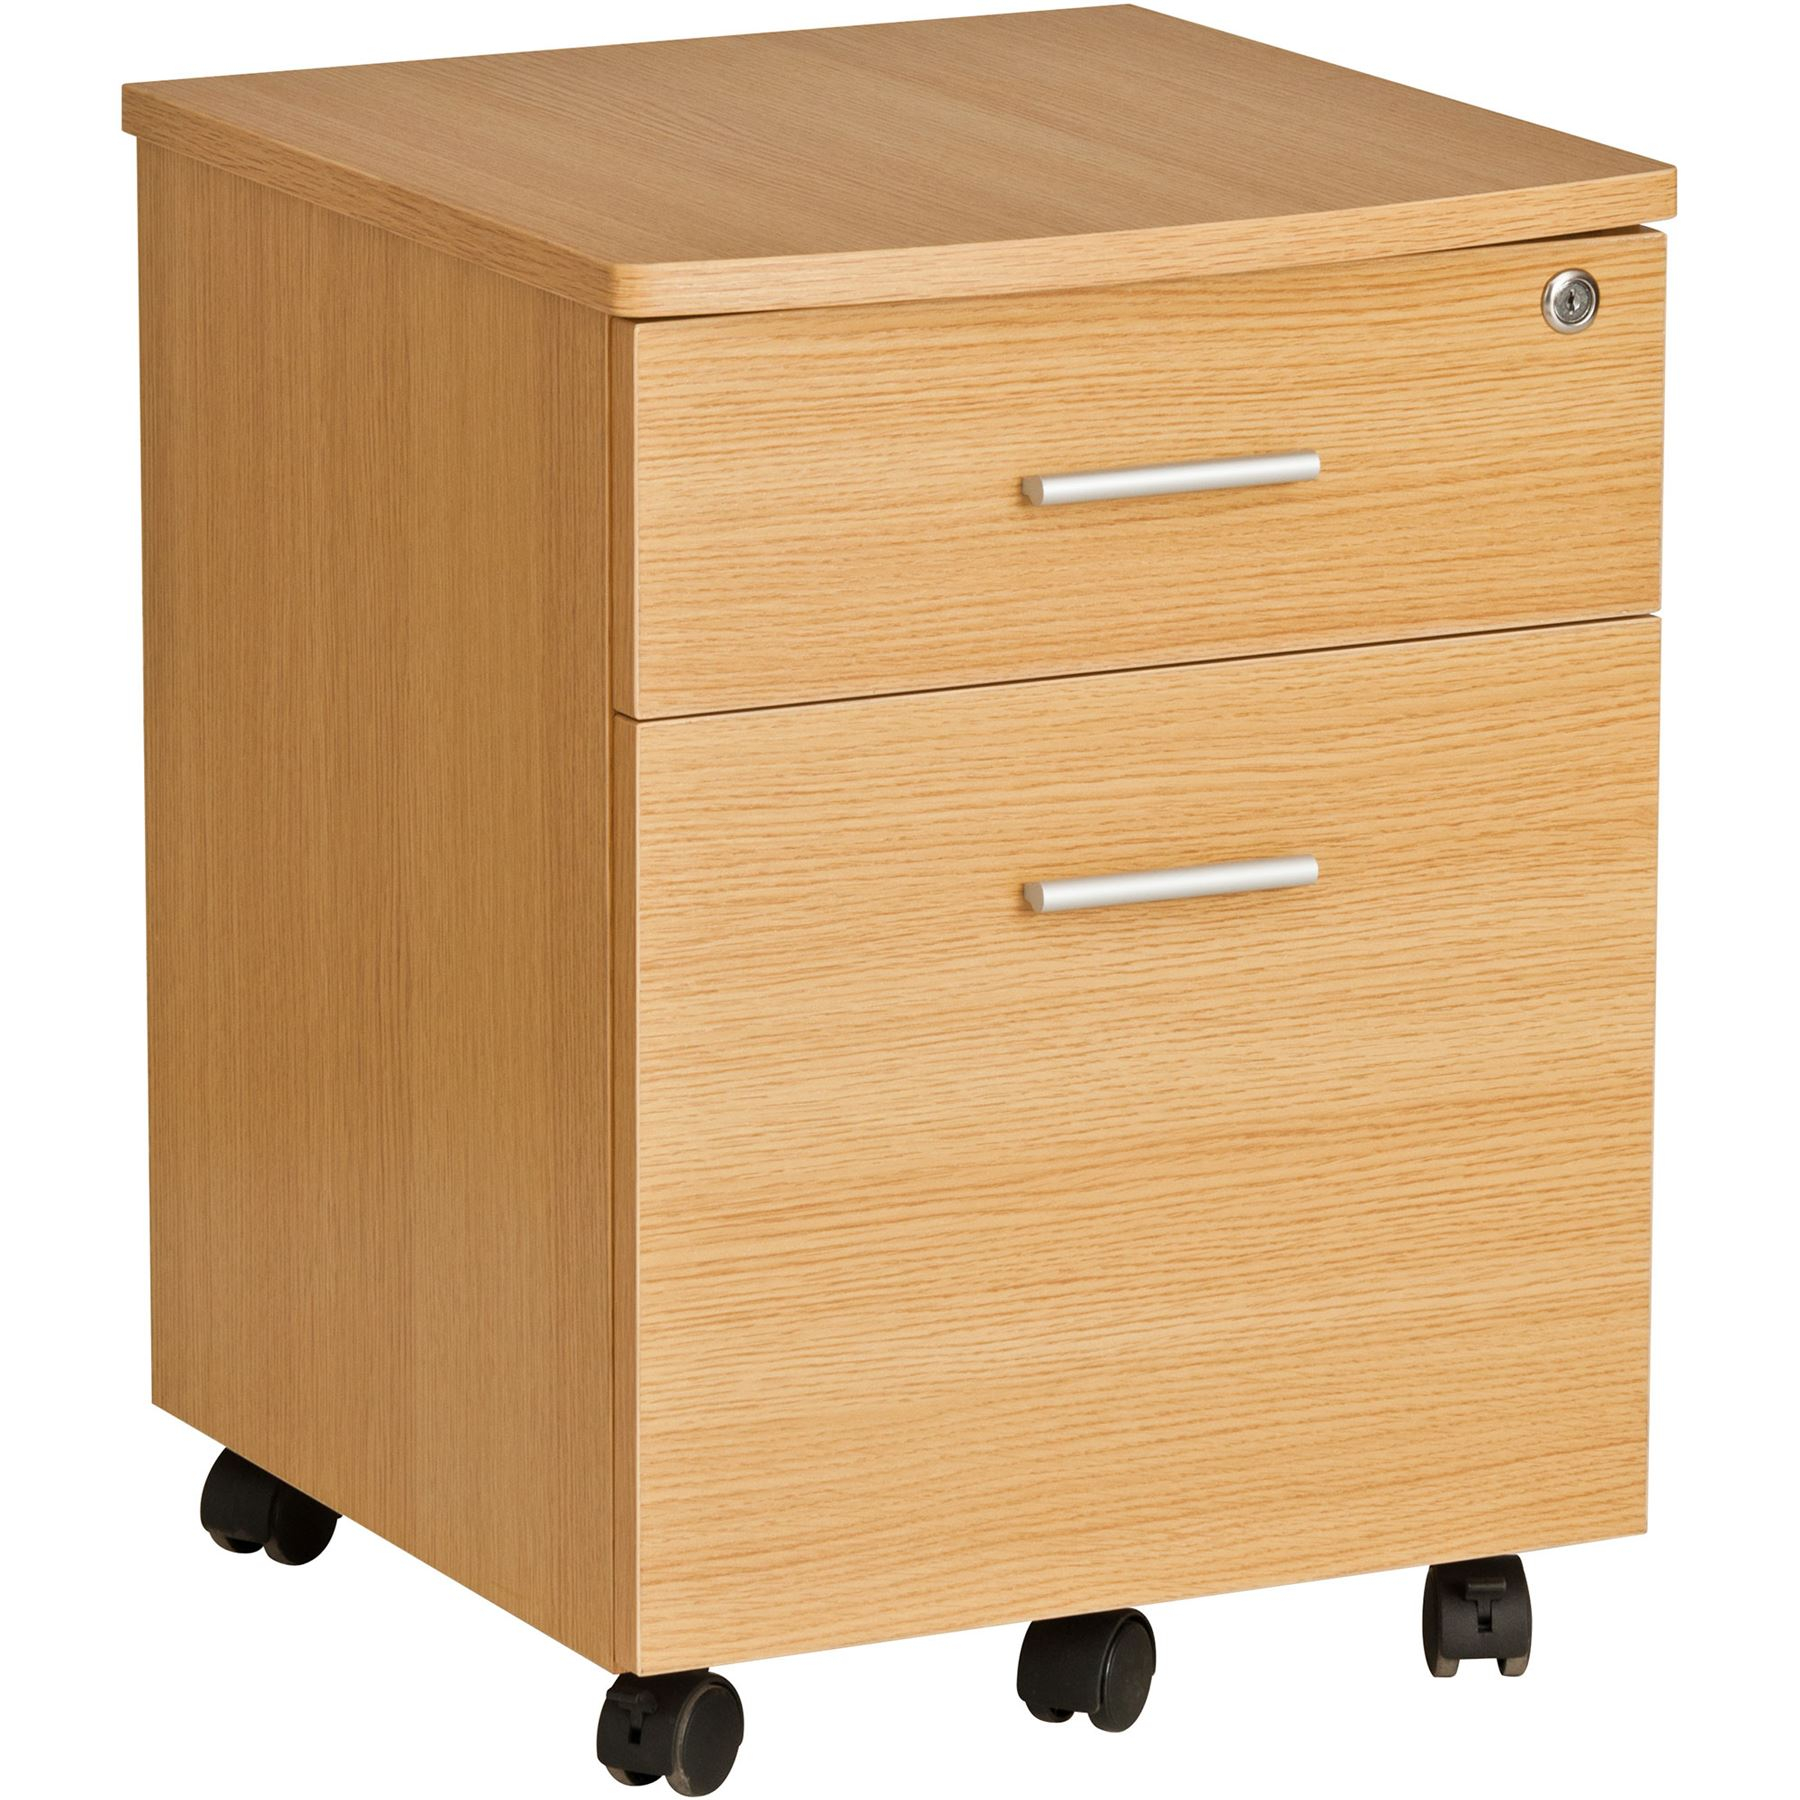 Details About 2 Drawer A4 Suspension Filing Cabinet W Lock Oak Finish Piranha Furniture Blenny pertaining to proportions 1800 X 1800